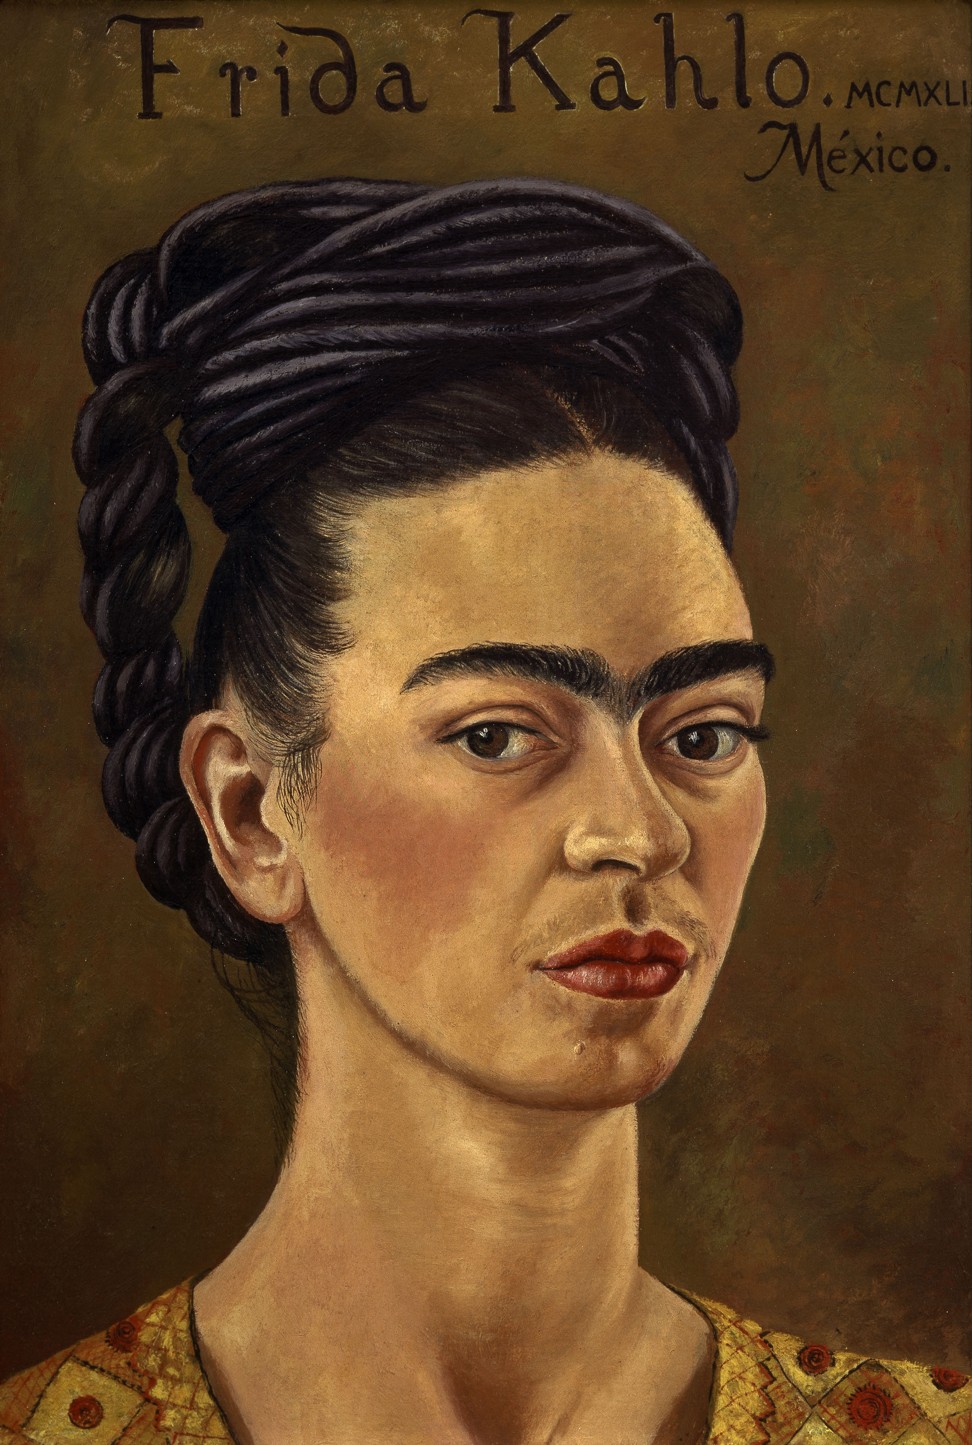 Frida Kahlo’s ‘Self-Portrait in Red and Gold Dress’ (1941).